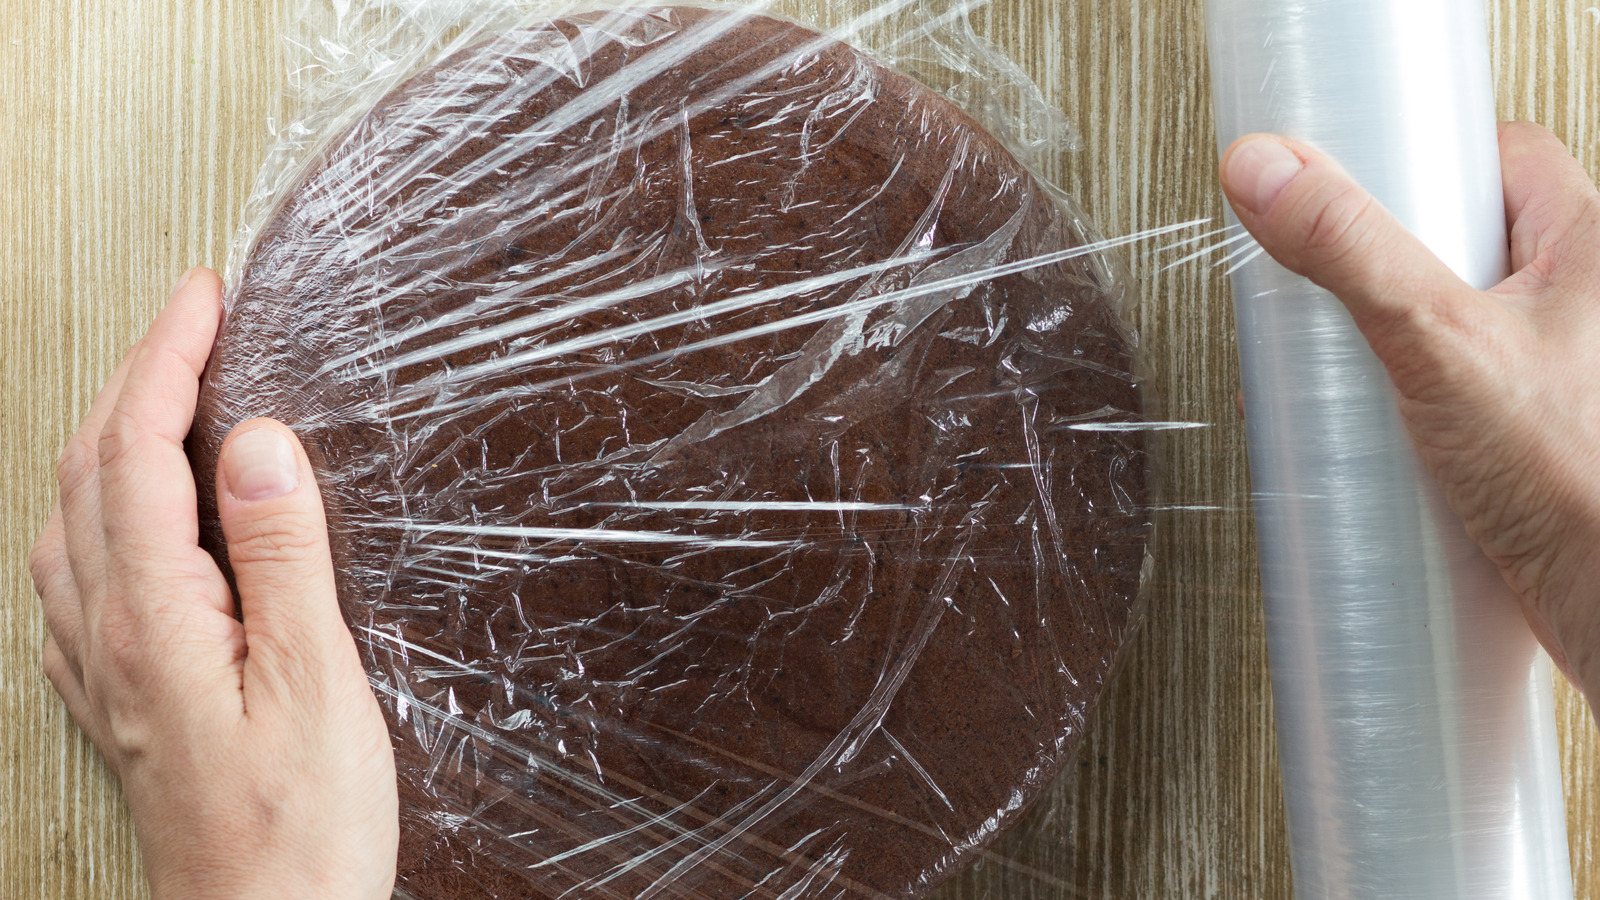 https://www.thedailymeal.com/img/gallery/why-you-should-cover-your-cake-in-plastic-wrap-fresh-out-of-the-oven/l-intro-1687877210.jpg